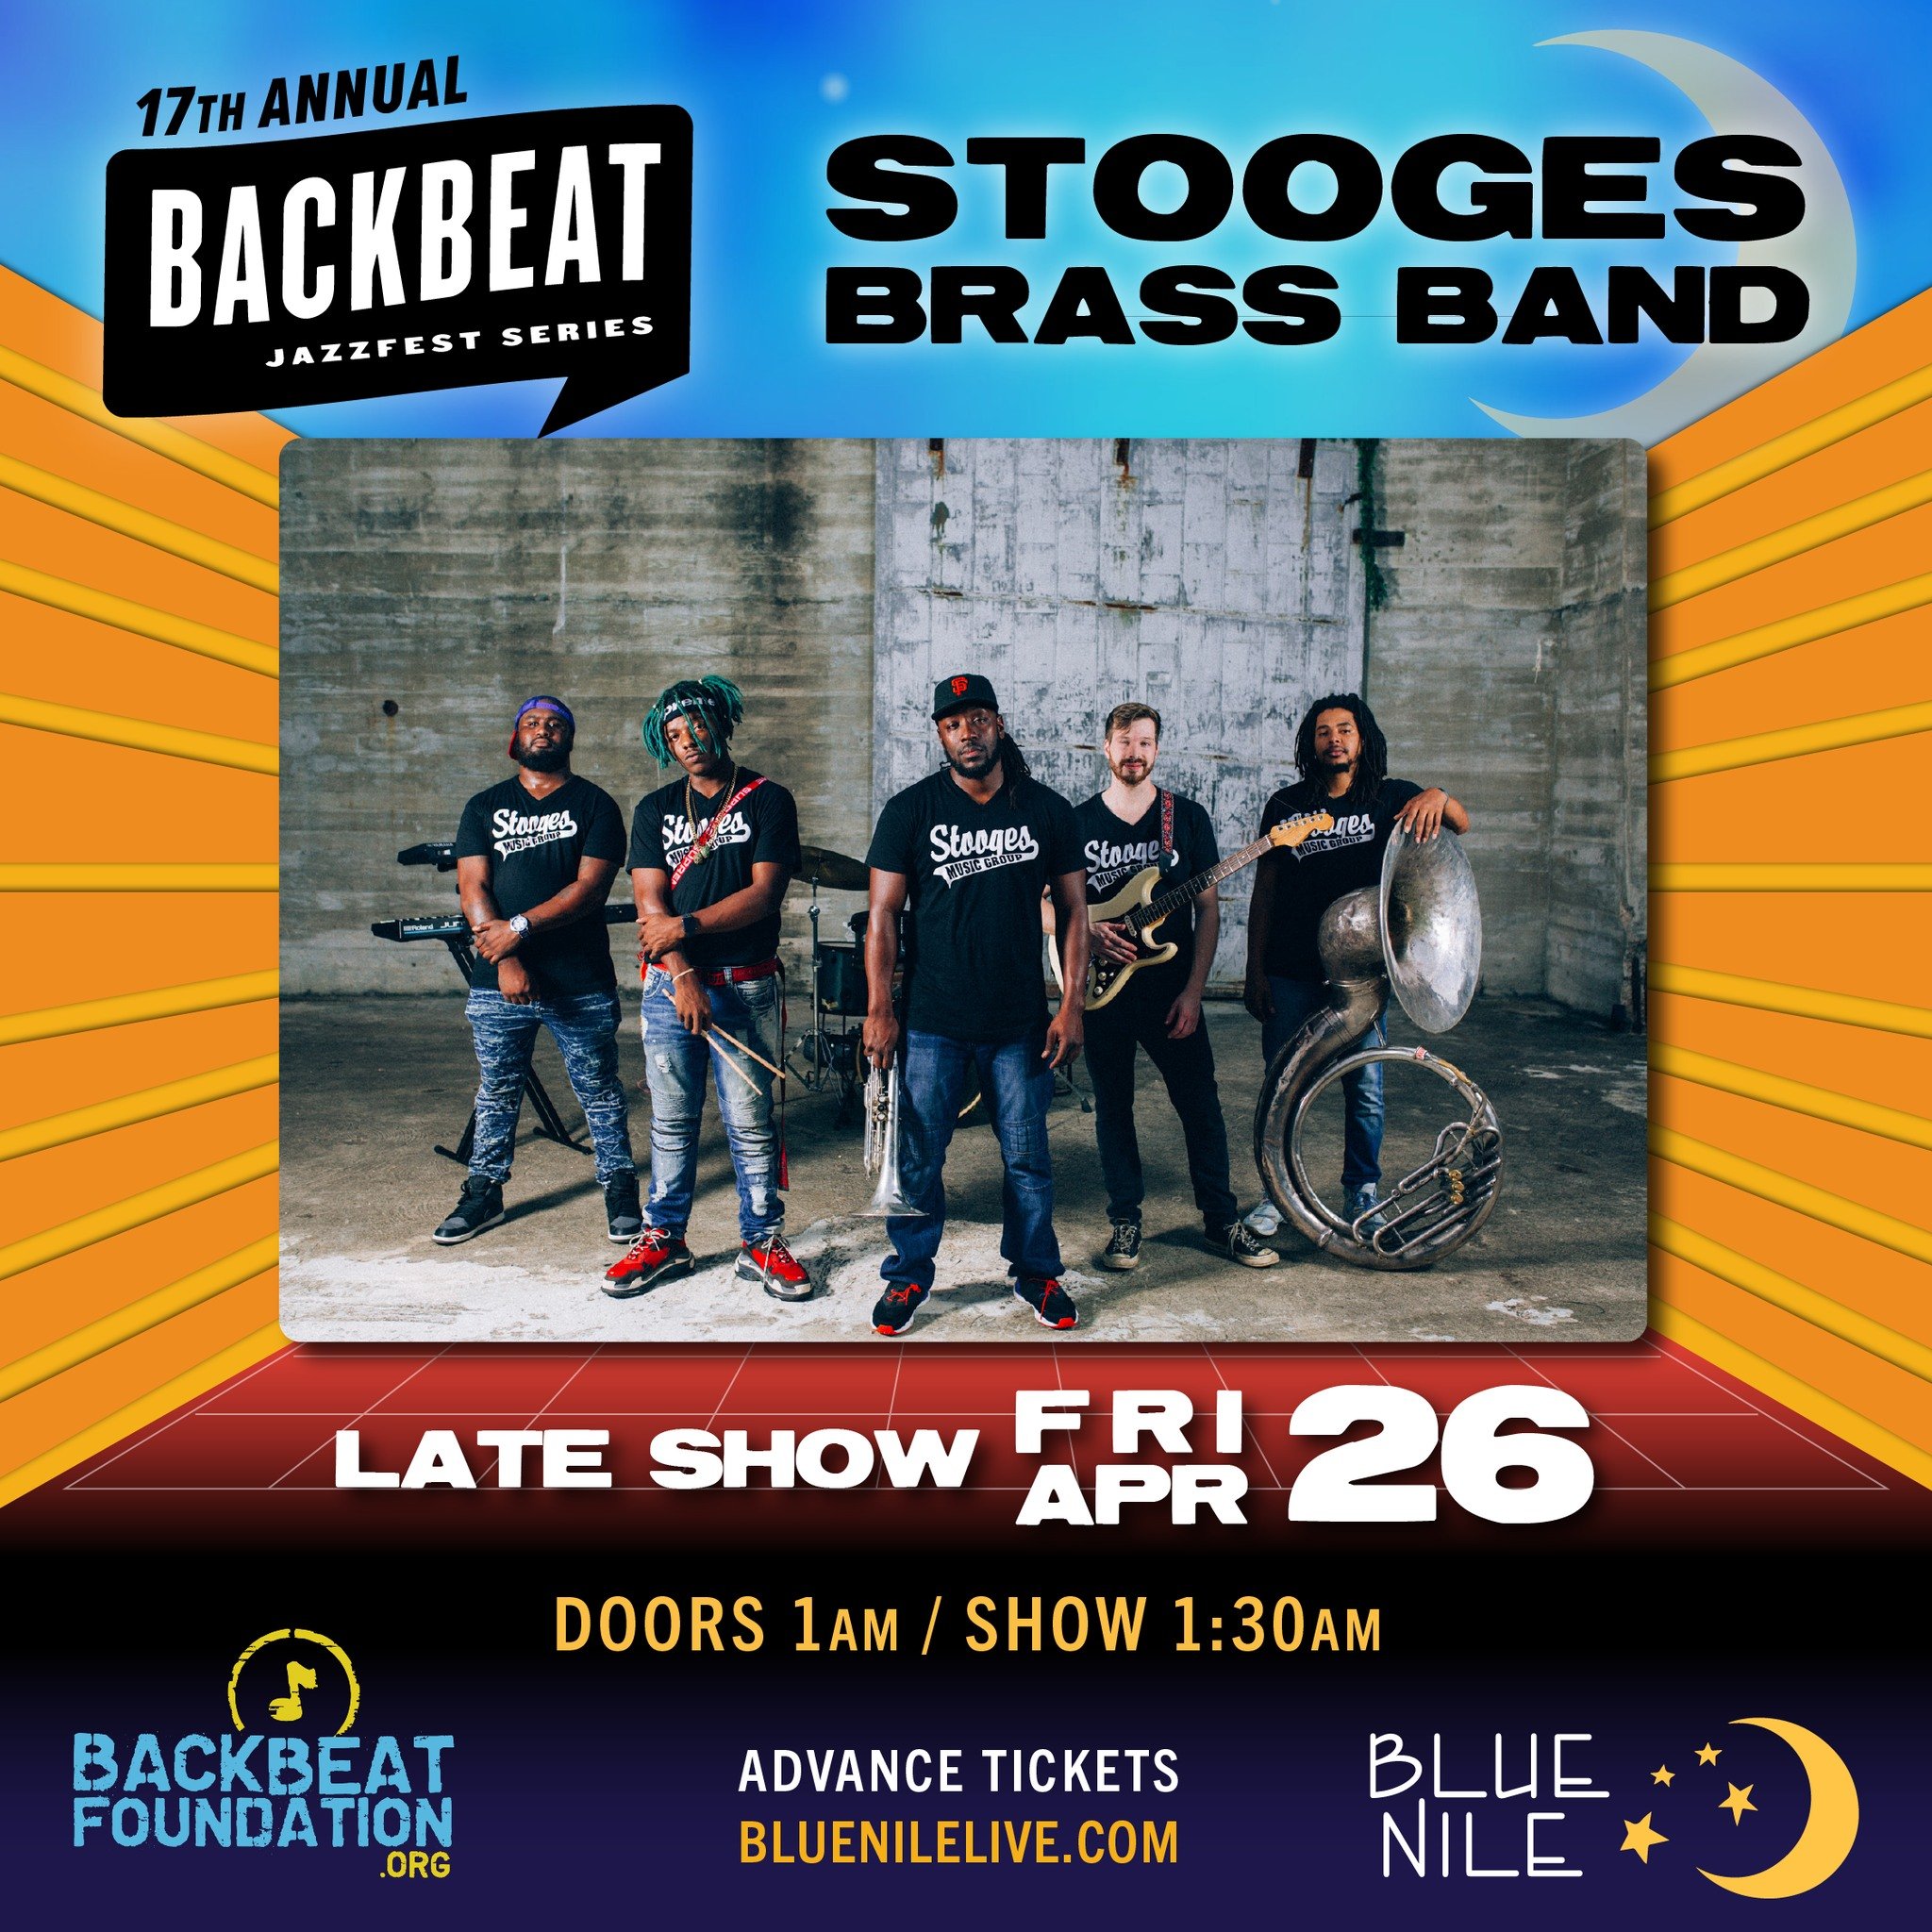 17th Annual Backbeat JazzFest Series presents Stooges Brass Band!
LATE SHOW Friday April 26 at 1:30AM (technically this show starts early morning April 27.)
✨🌙
ADVANCE TICKETS ON SALE NOW at bluenilelive.com

@backbeatfoundation @stoogesbrassband  #